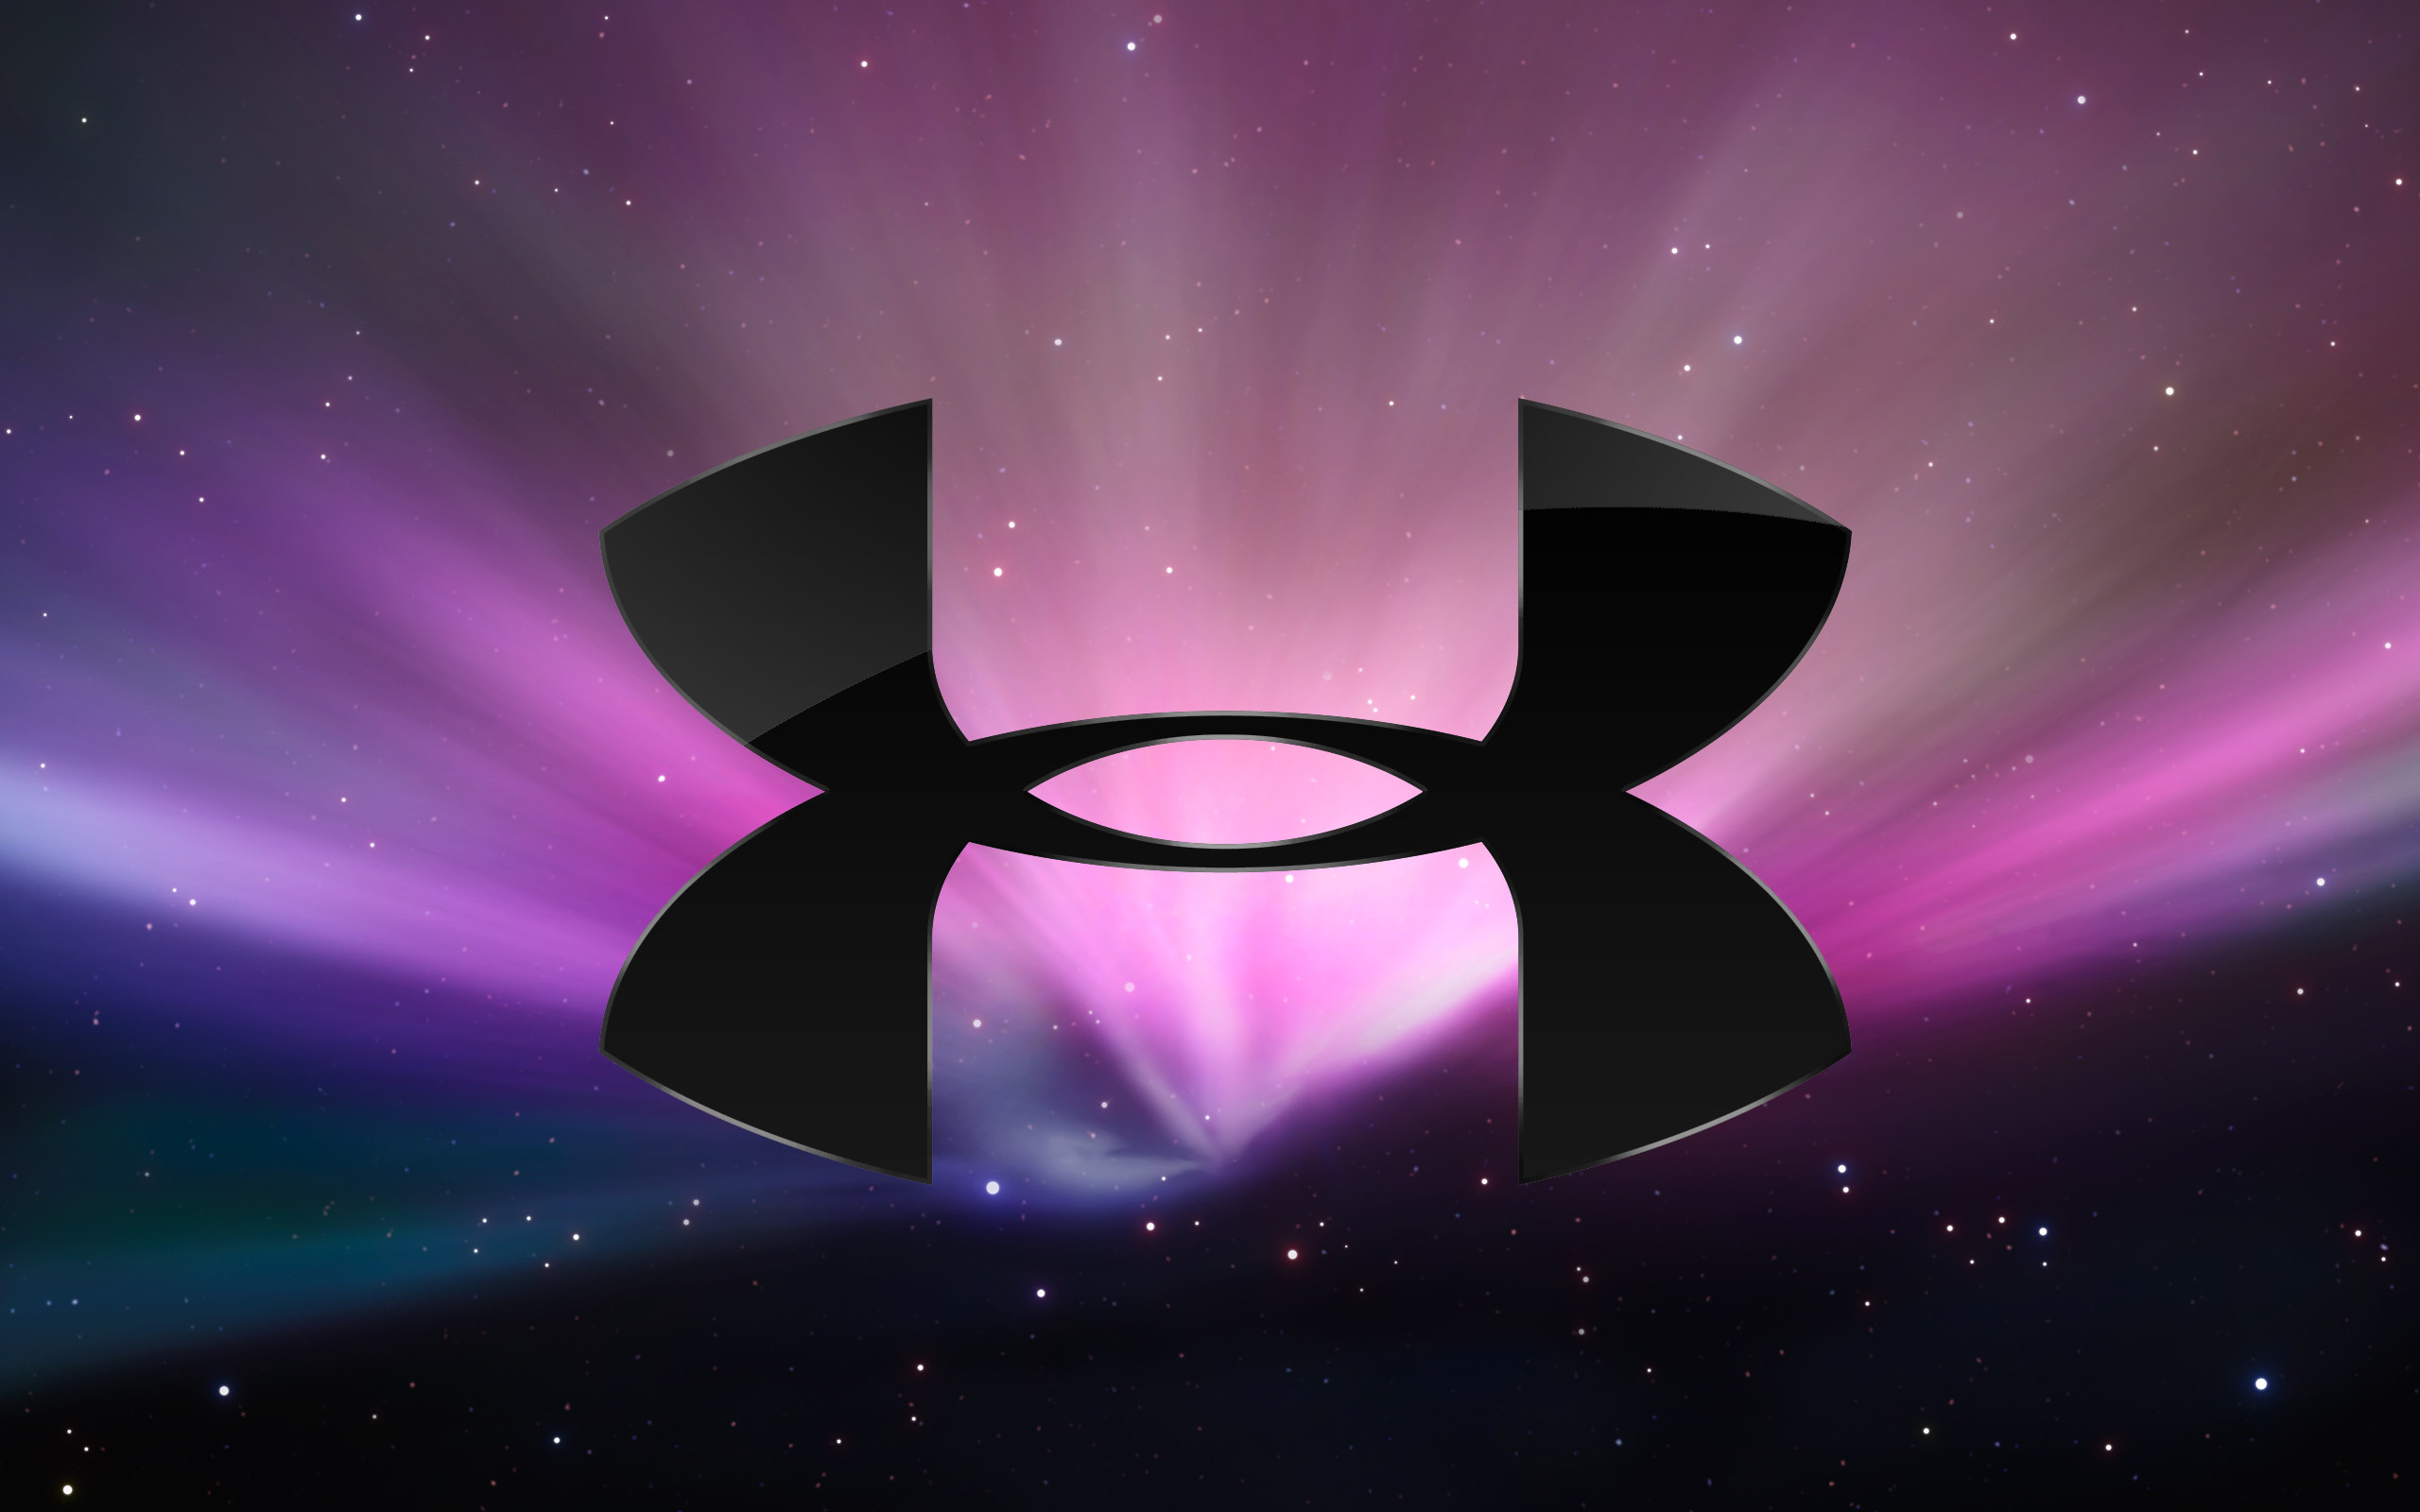 2560x1600 1000+ images about Underarmour on Pinterest | Logos, Armors and